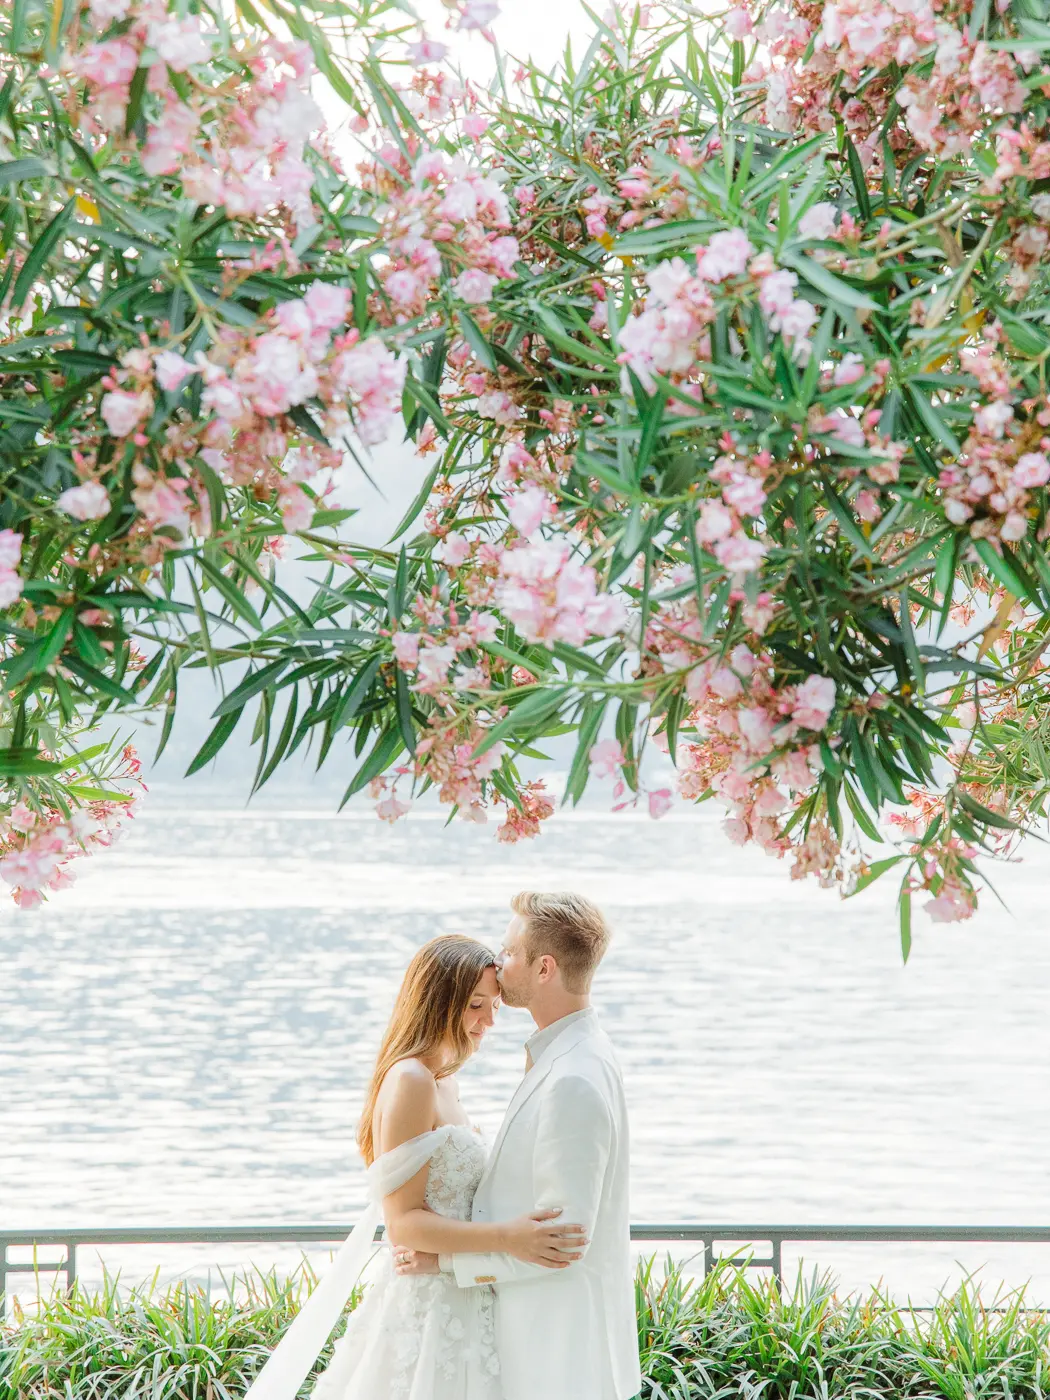 A candid moment captured as the newlyweds share a kiss against the enchanting backdrop of Lake Como's azure waters and booming fowers